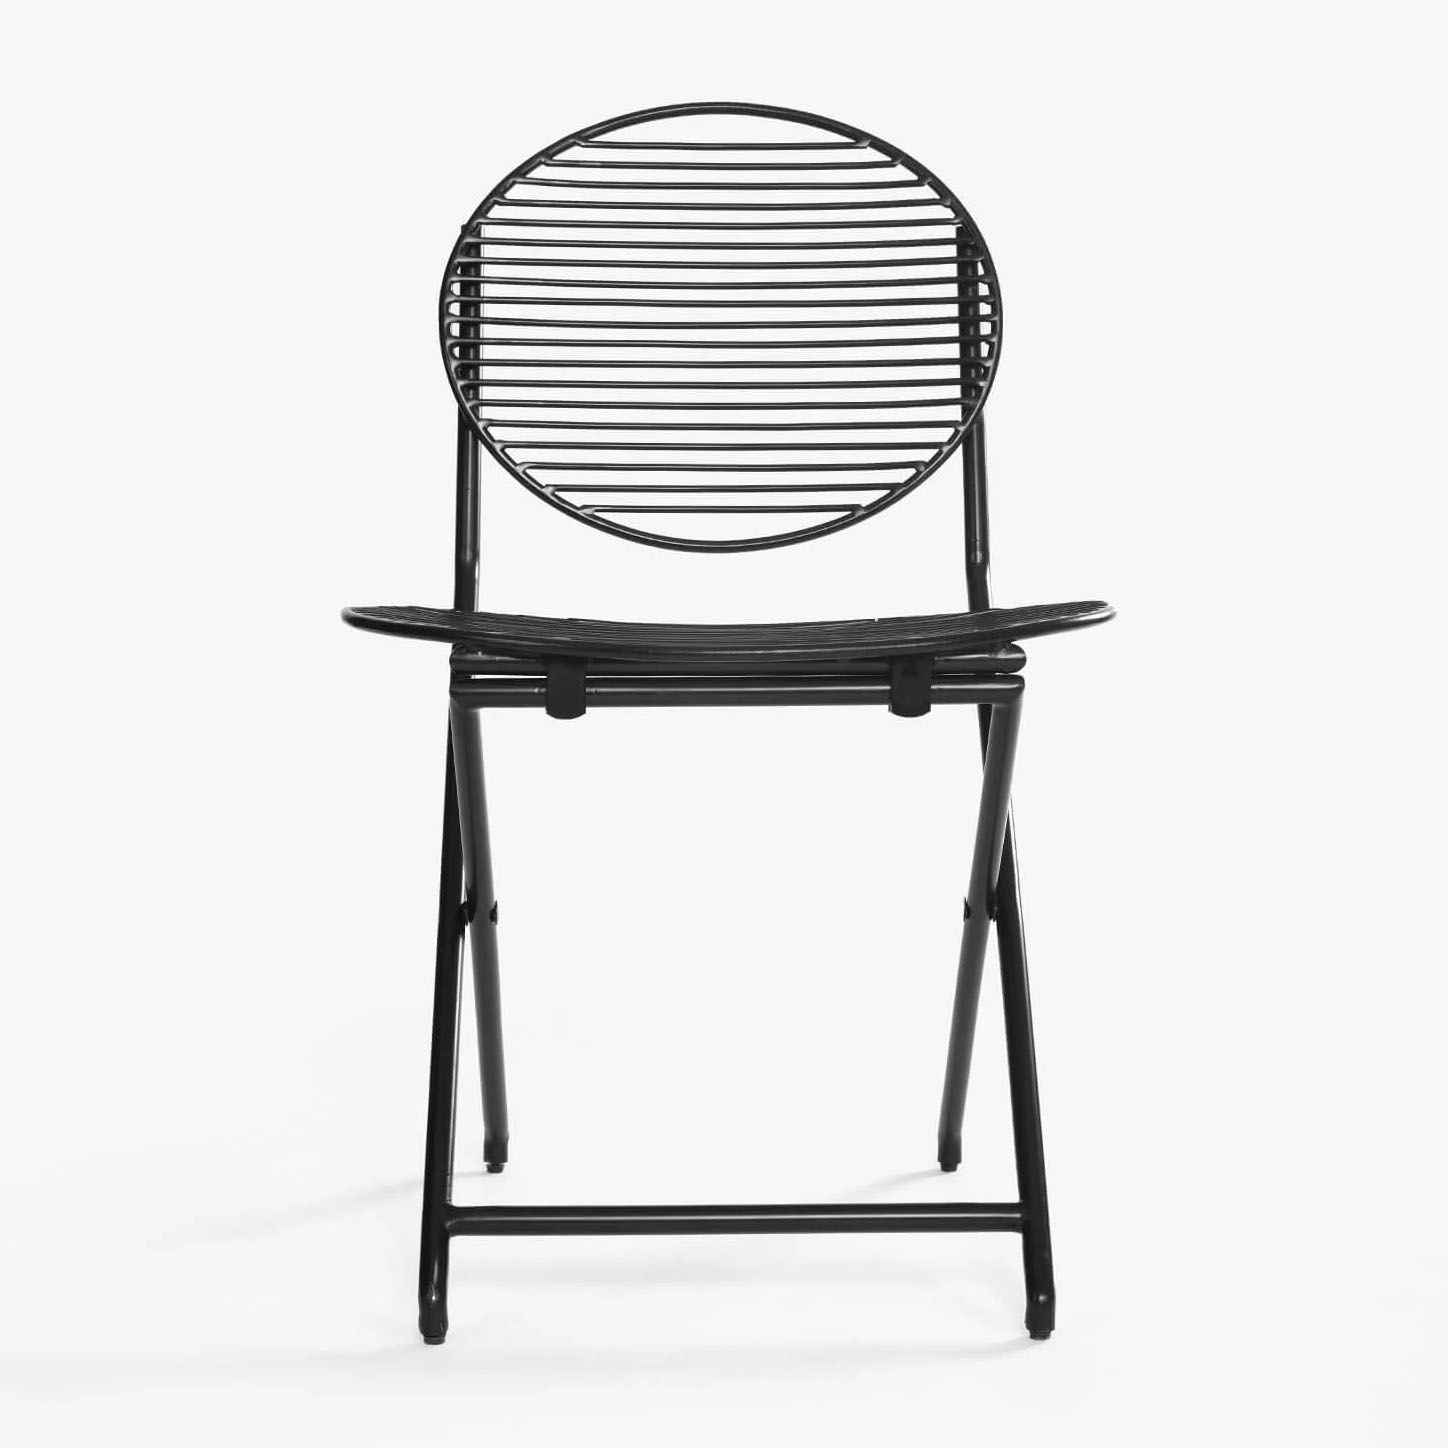 Irn Wireframe Chair 4